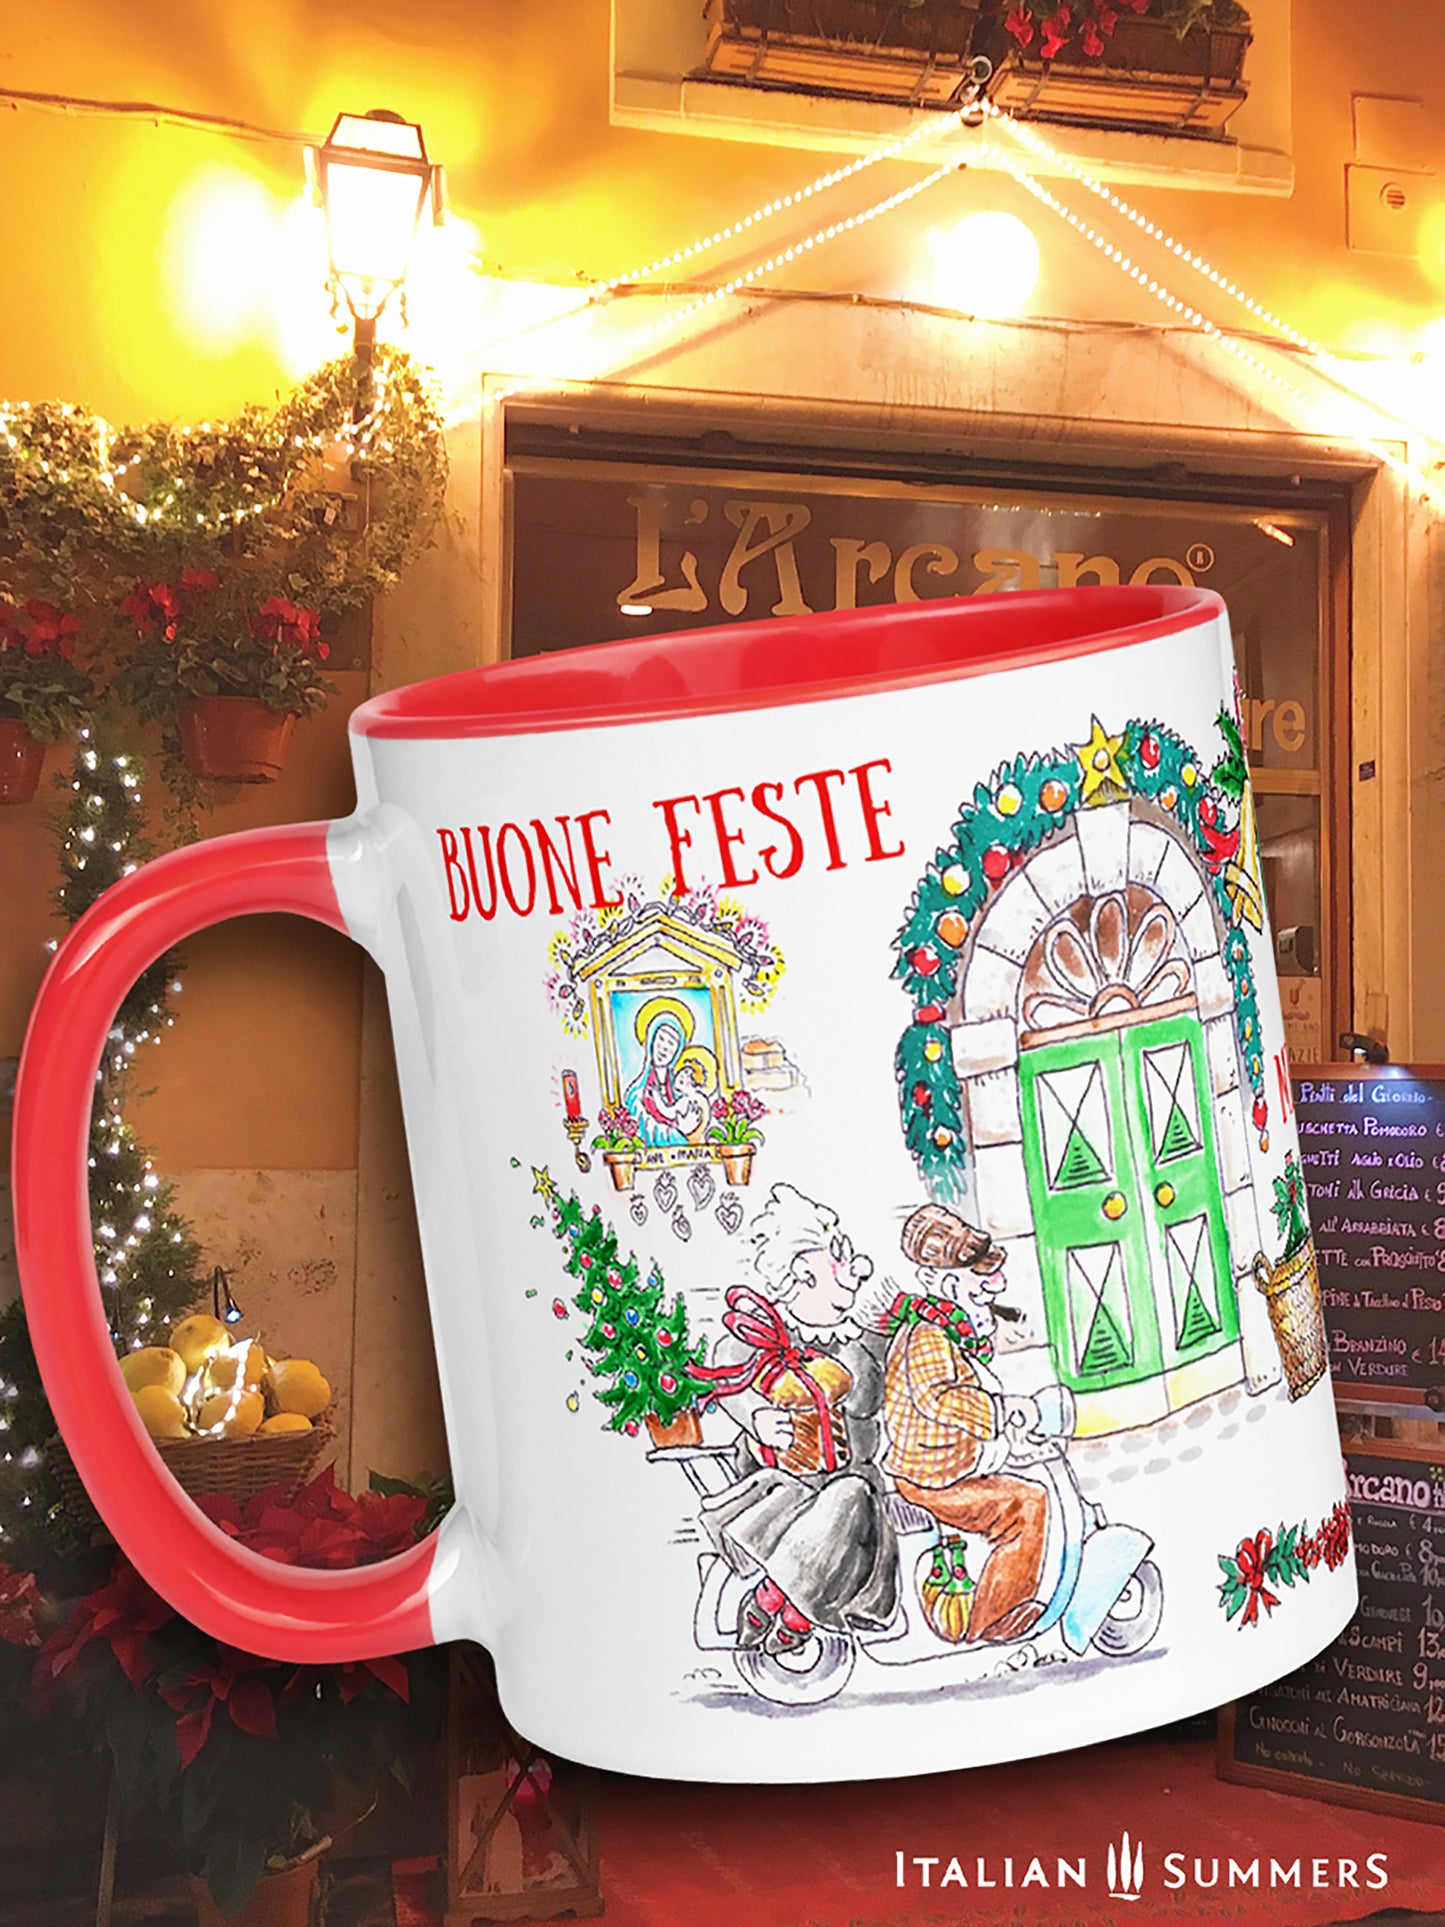 Italian Christmas mug! From Santa driving his Fiat 500 to nonno and nonna cruising the town on their vintage vespa, this mug lets you transport the warm and cozy atmosphere of an Italian Christmas tradition. Made by  Italian Summers.